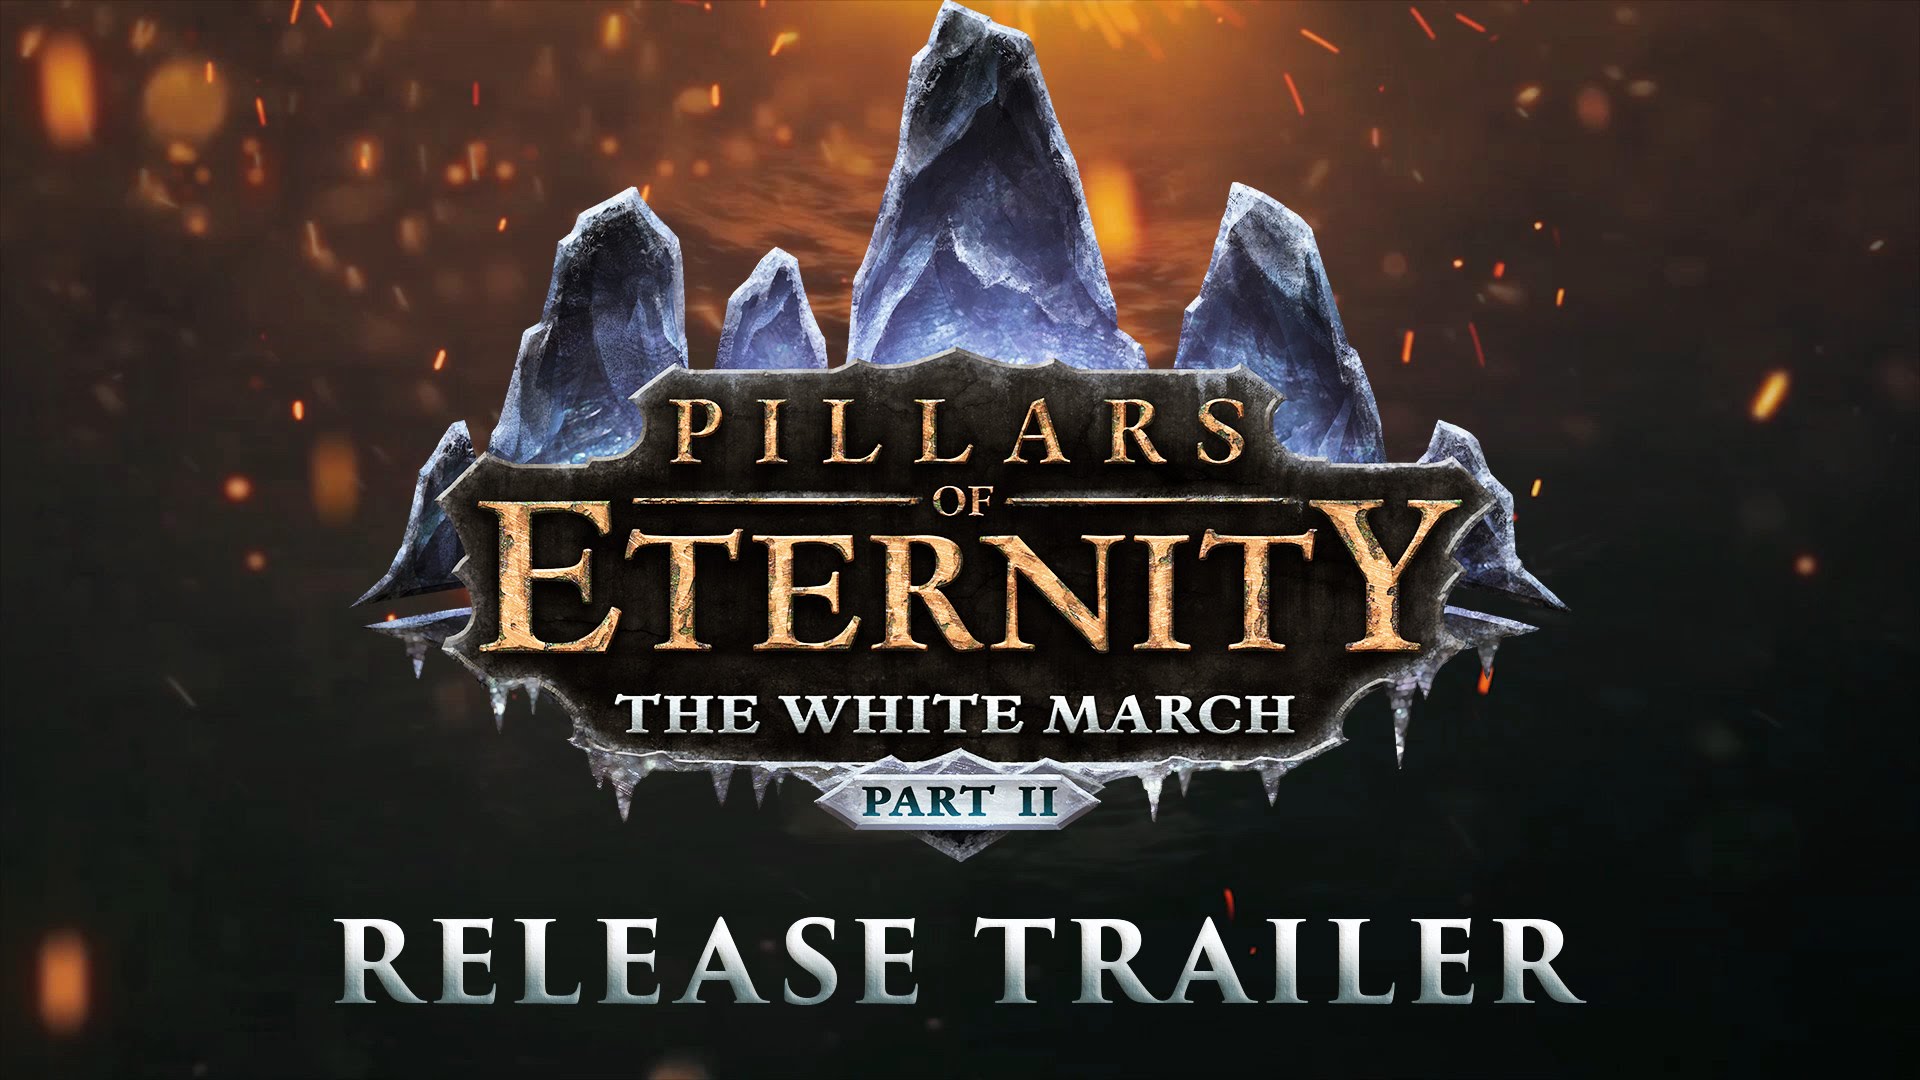 Pillars of Eternity - The White March Part 2 - Release Trailer